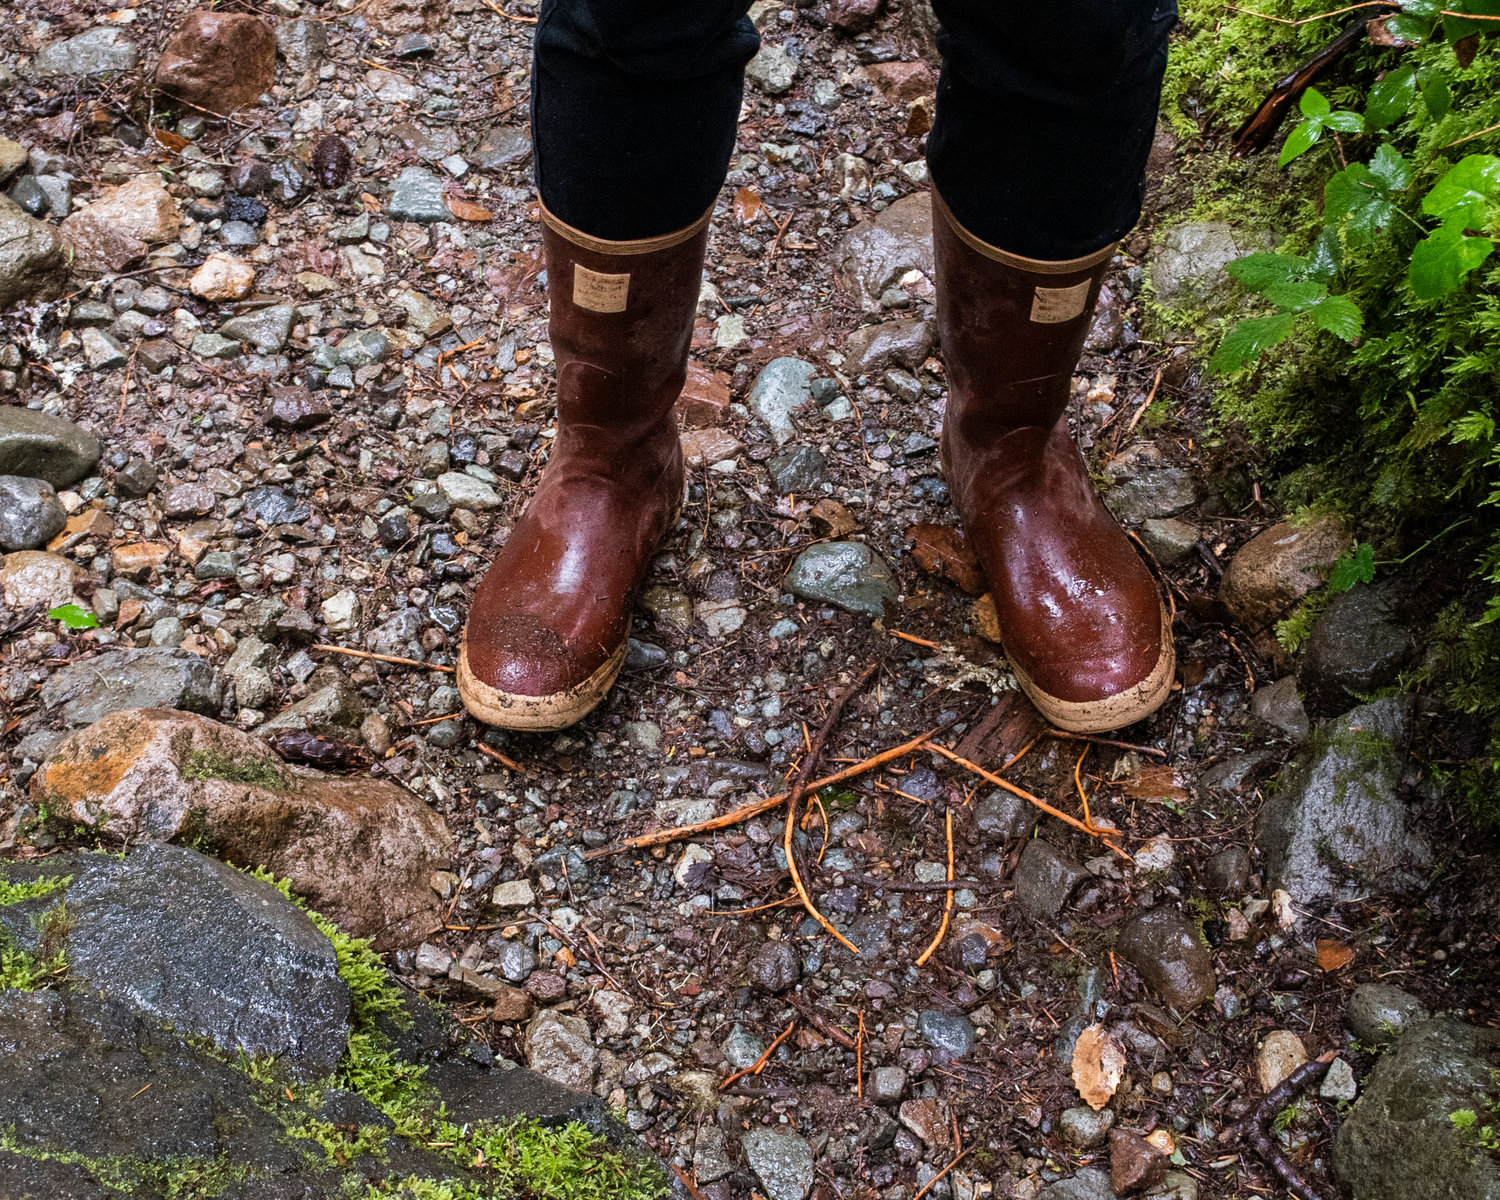 A hiker’s rubber boots are pictured during a rainy day at Ohanapecosh in Mount Rainier National Park on Sunday afternoon.